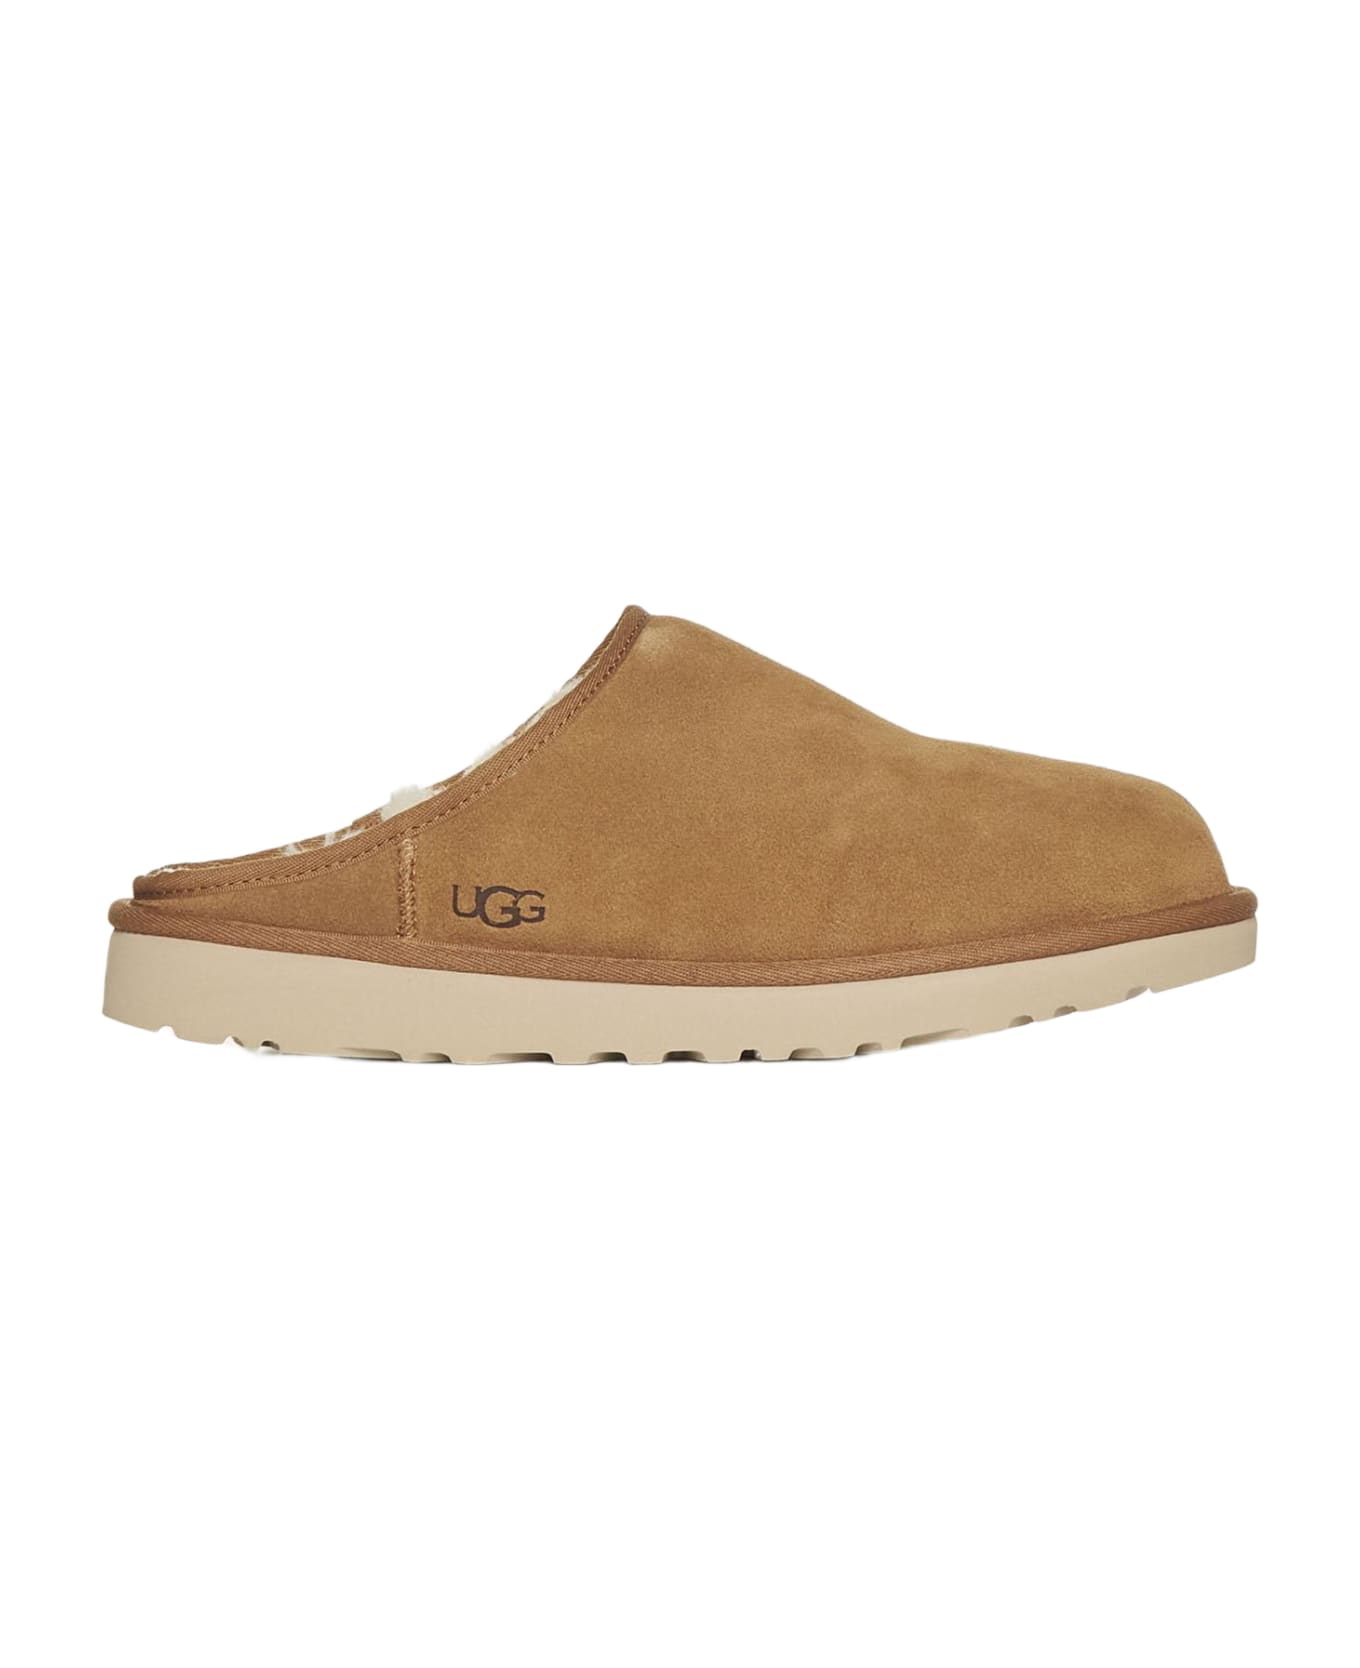 UGG Suede Slip-on Mules - Che Chestnut